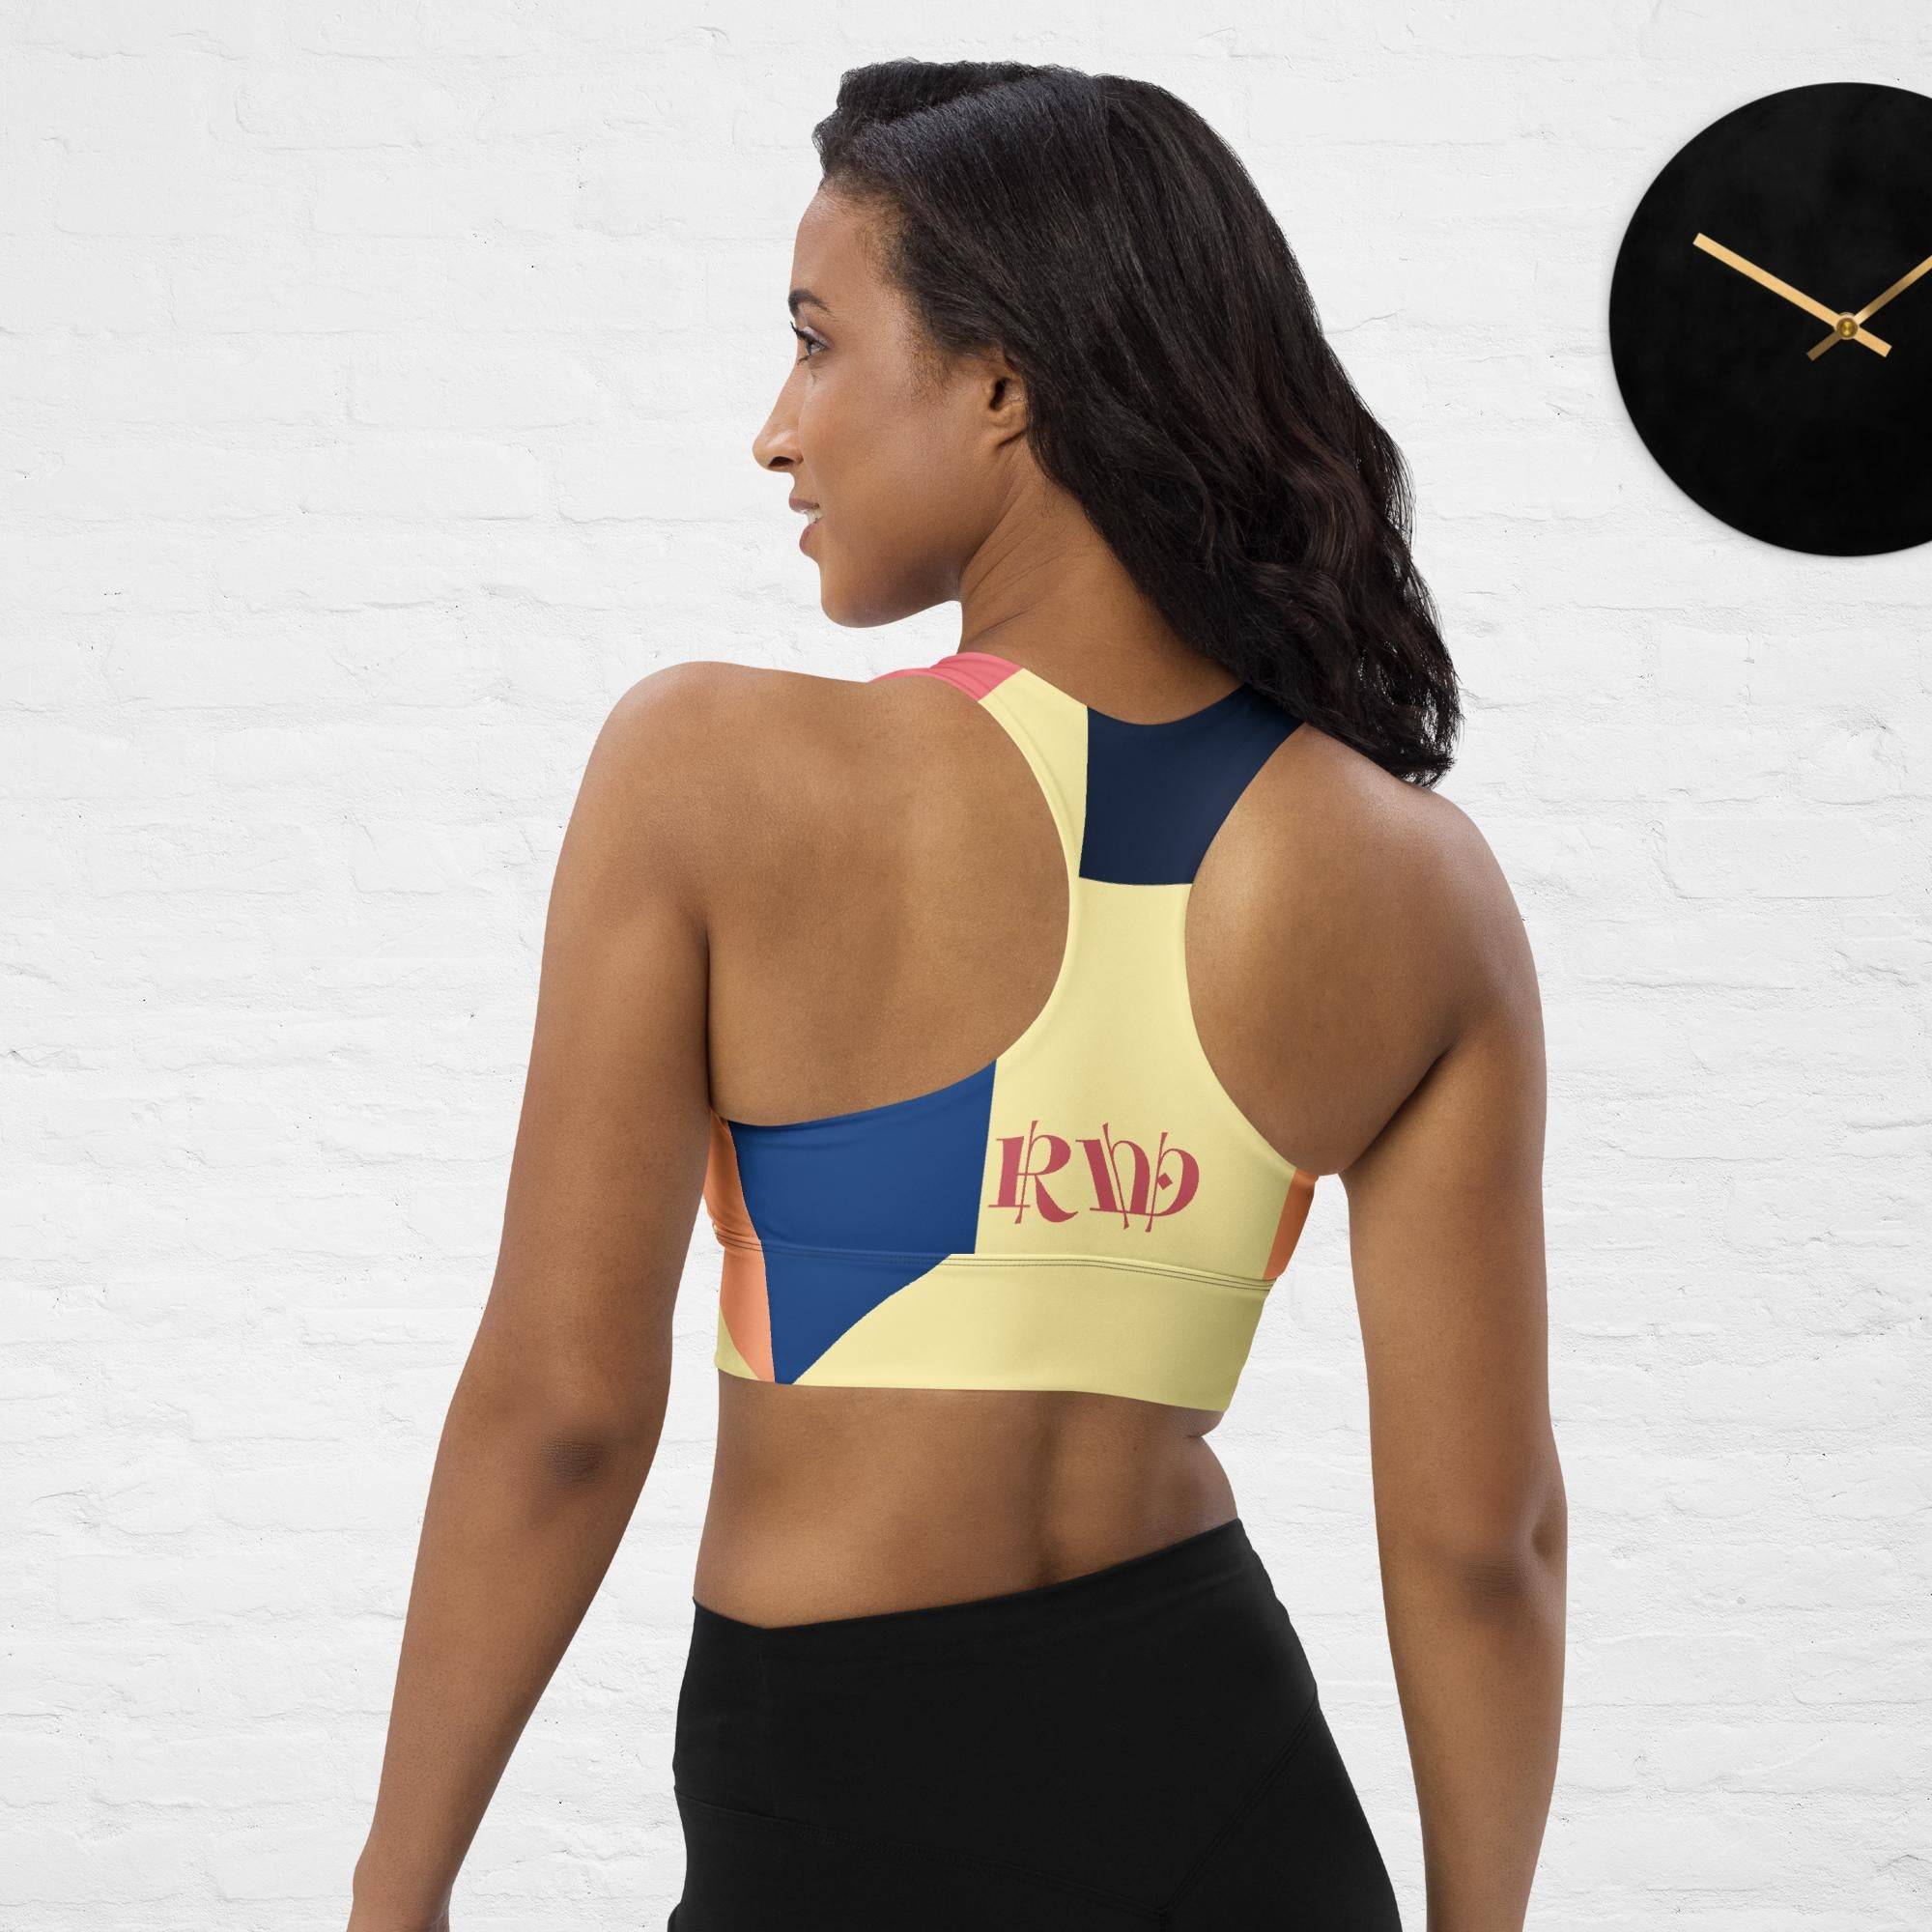 Activewear Longline Sports Bra in Abstract Print - Revive Wear     Comfortable Activewear Bra. Enjoy a supportive fit with our Longline Sports Bra, designed for maximum comfort during workouts. Browse your size today at Revive Wear.